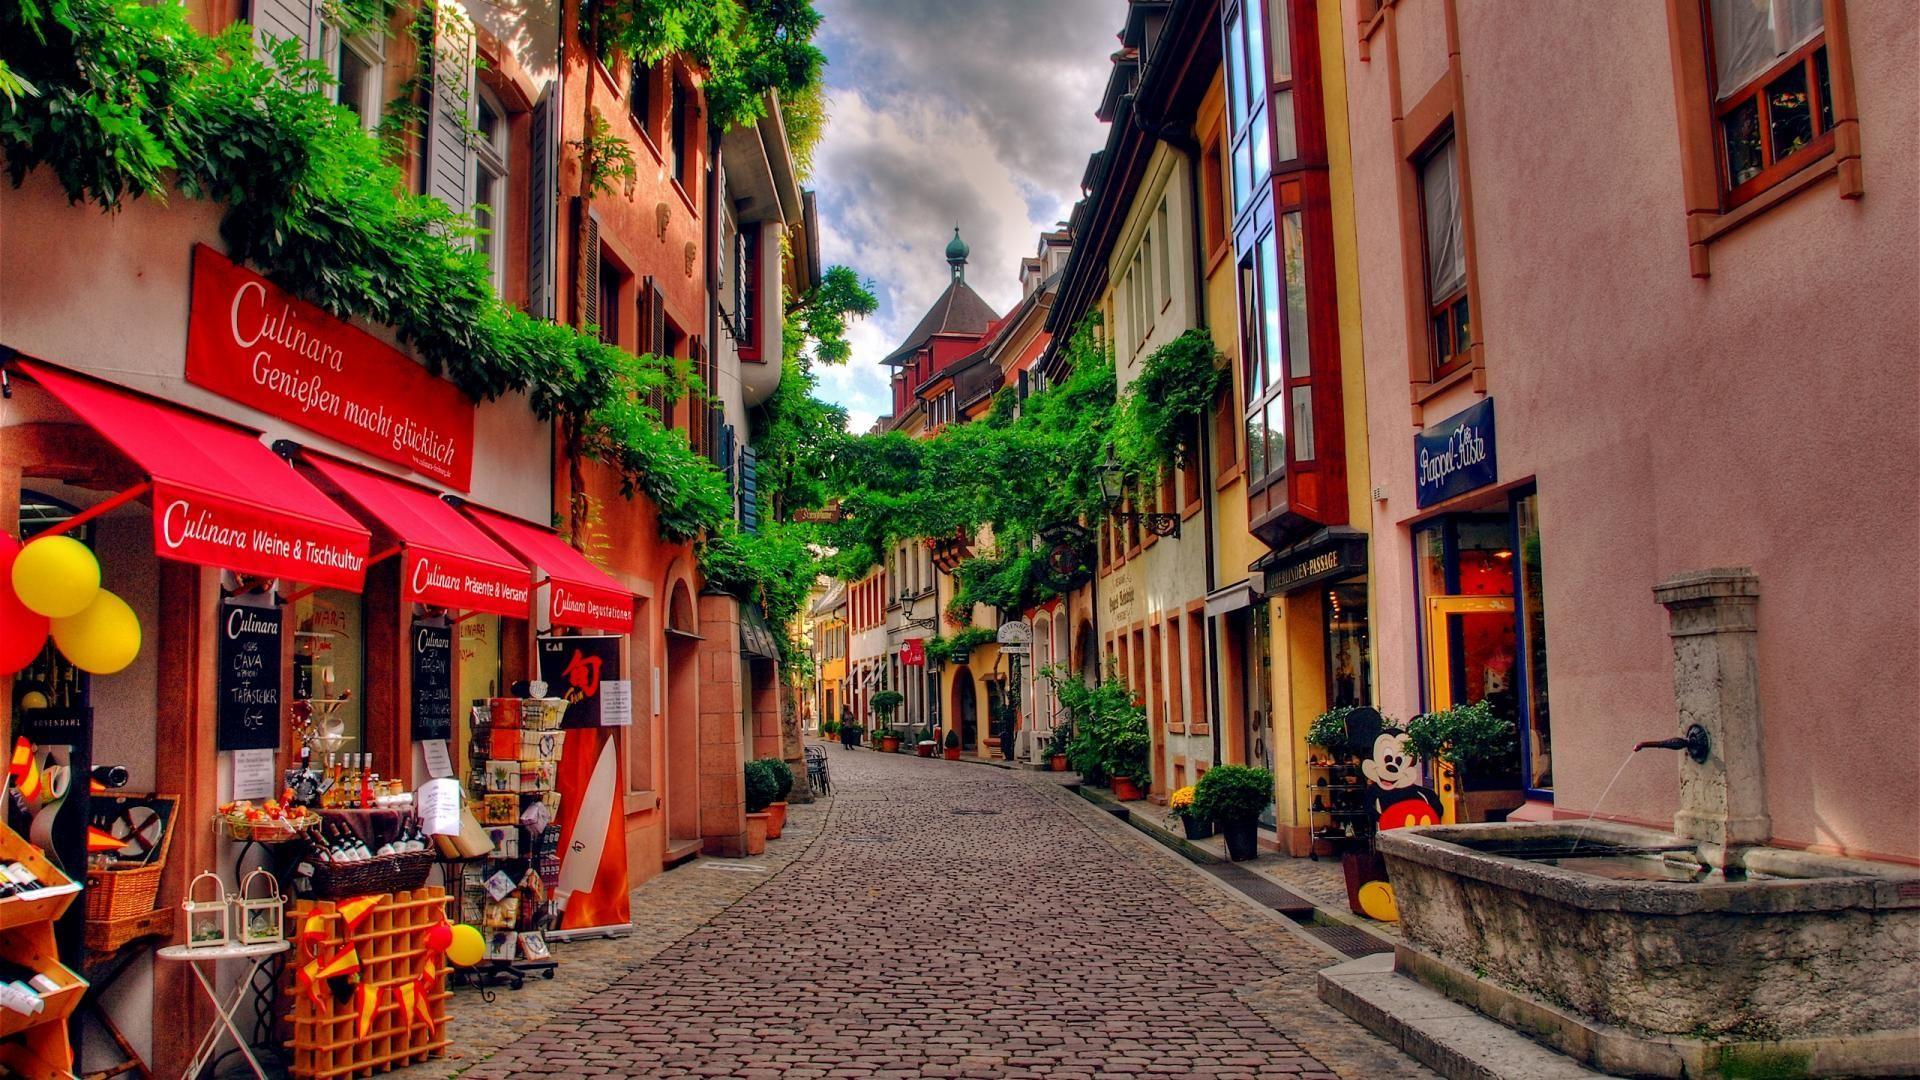 Germany HQ Wallpaper Full HD Picture 1920×1096 Germany Image Wallpaper (39 Wallpaper). Adorable Wallpape. Places to see, Beautiful places, Places to travel